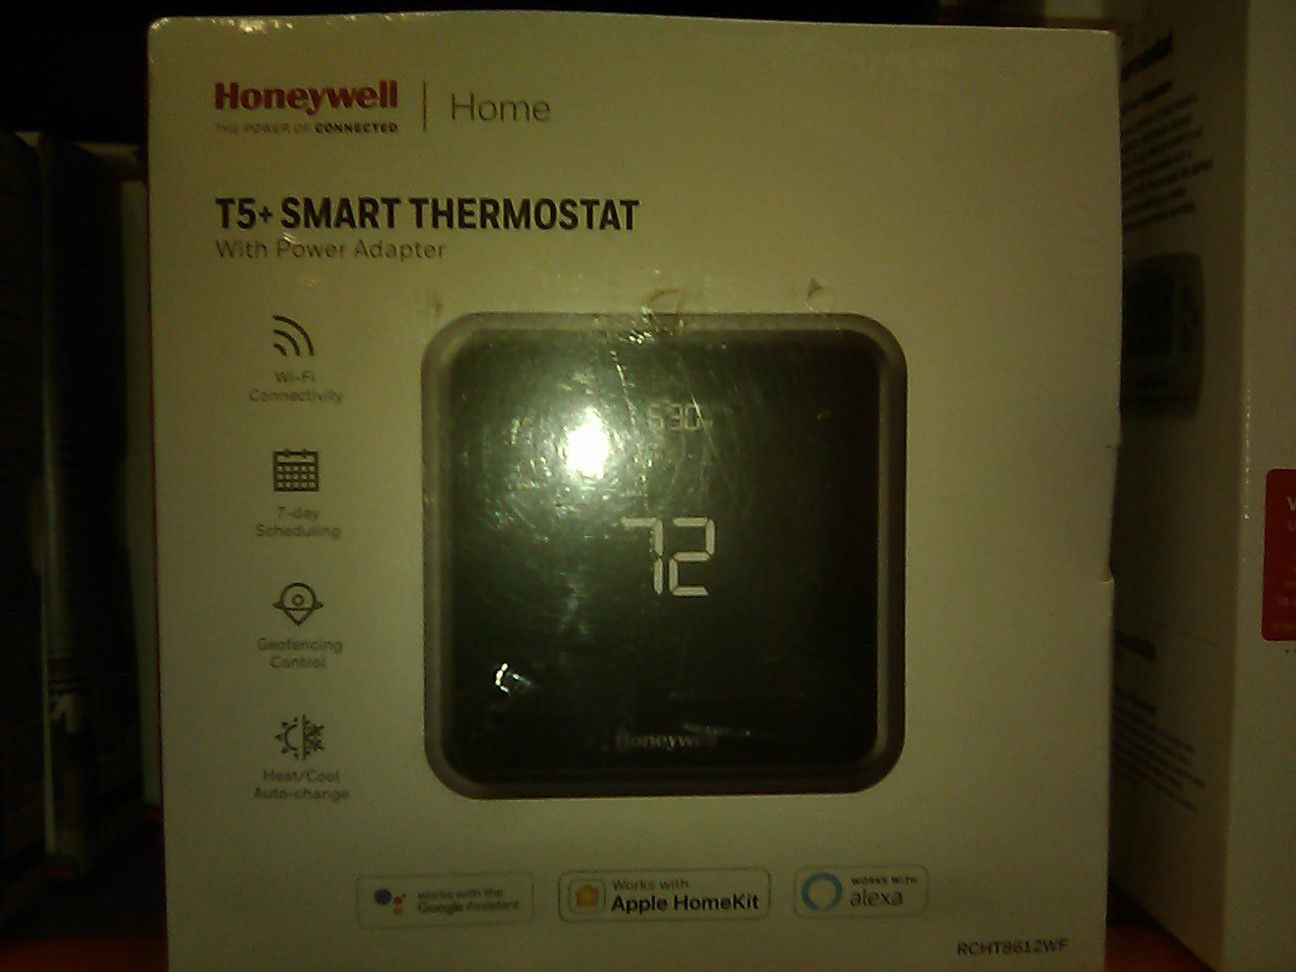 New Smart Thermostat, Honeywell T5, with WIFI conectivity, 7 day scheduling, Geofencing Control, heat/cool auto change.